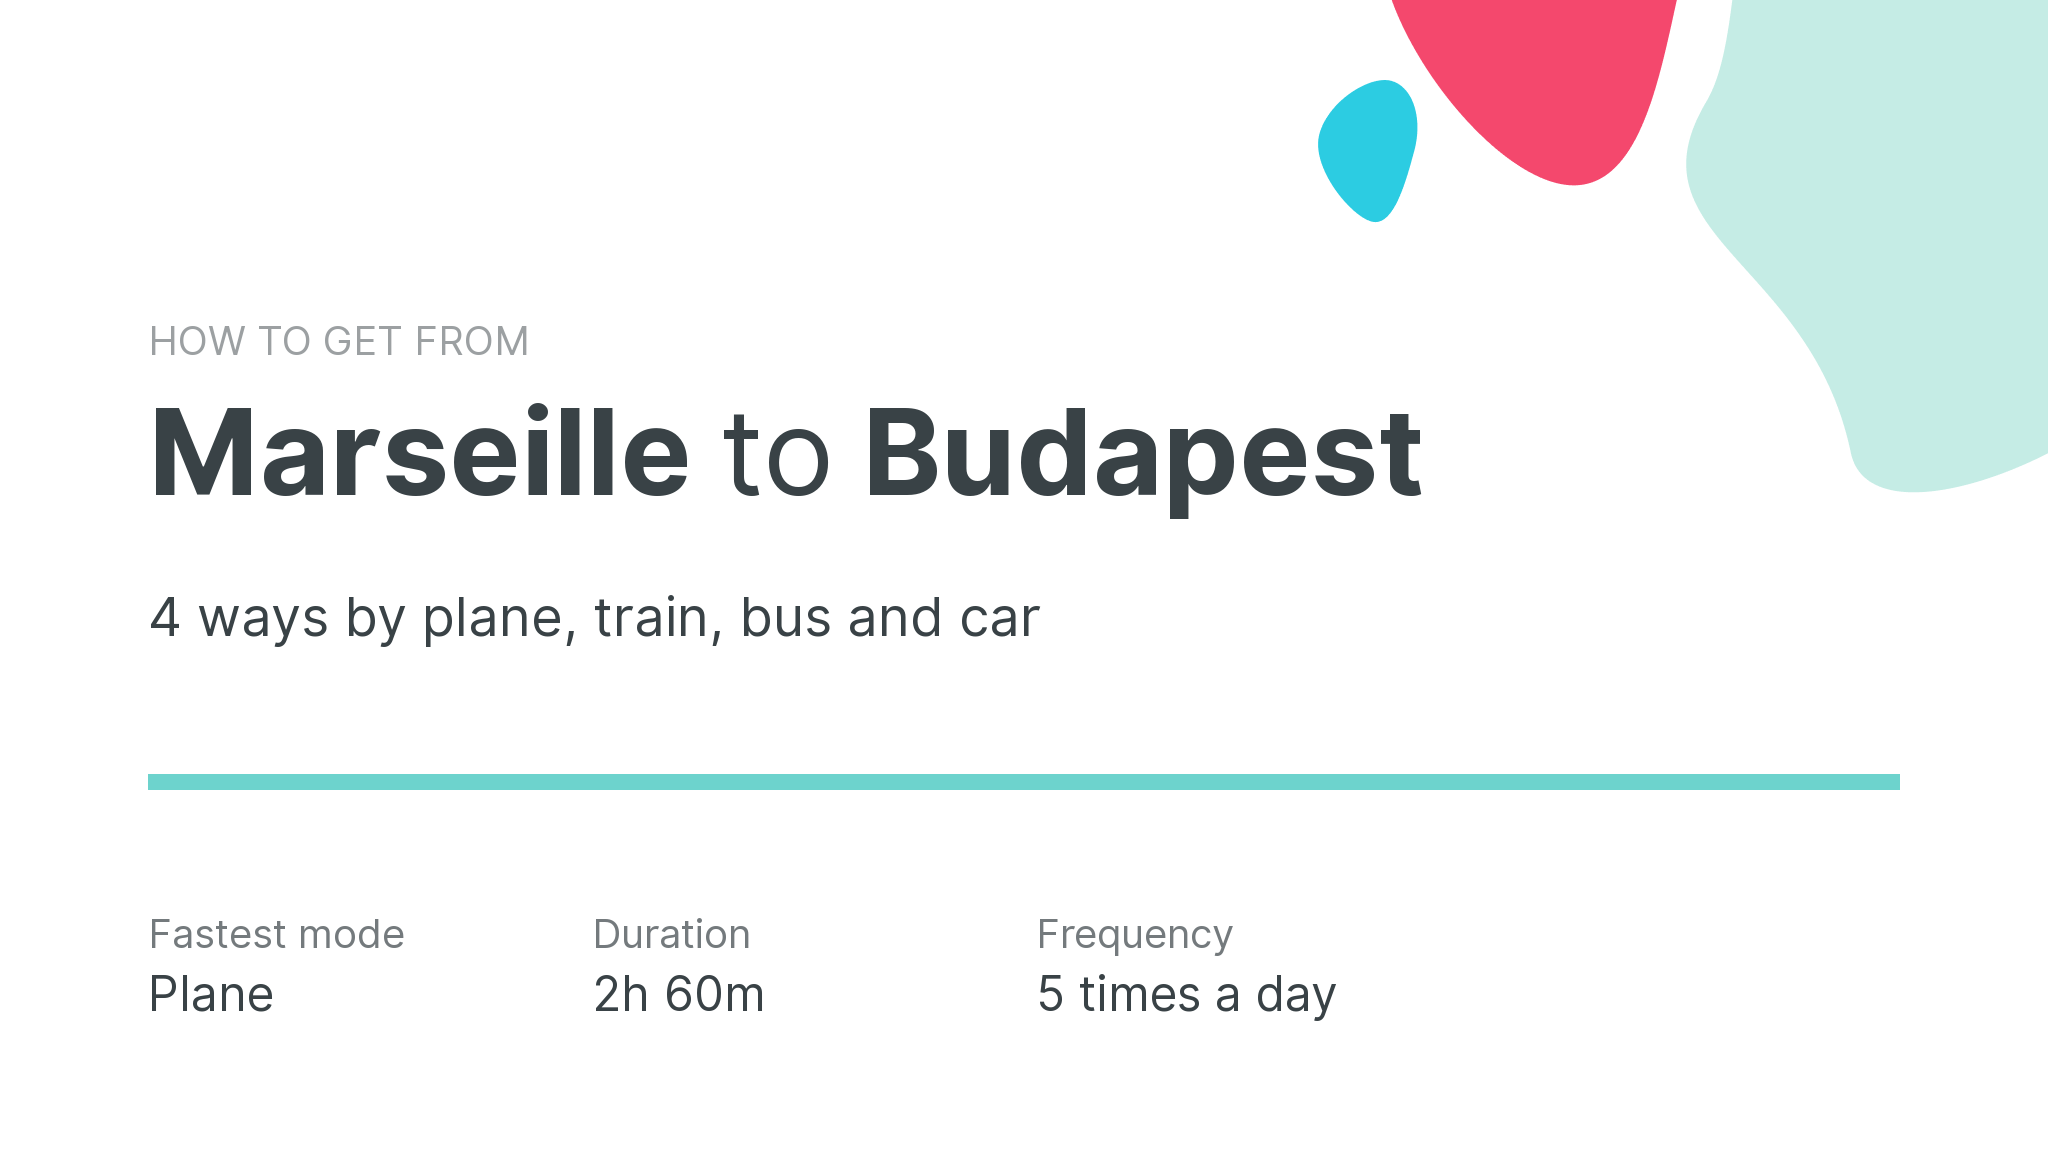 How do I get from Marseille to Budapest